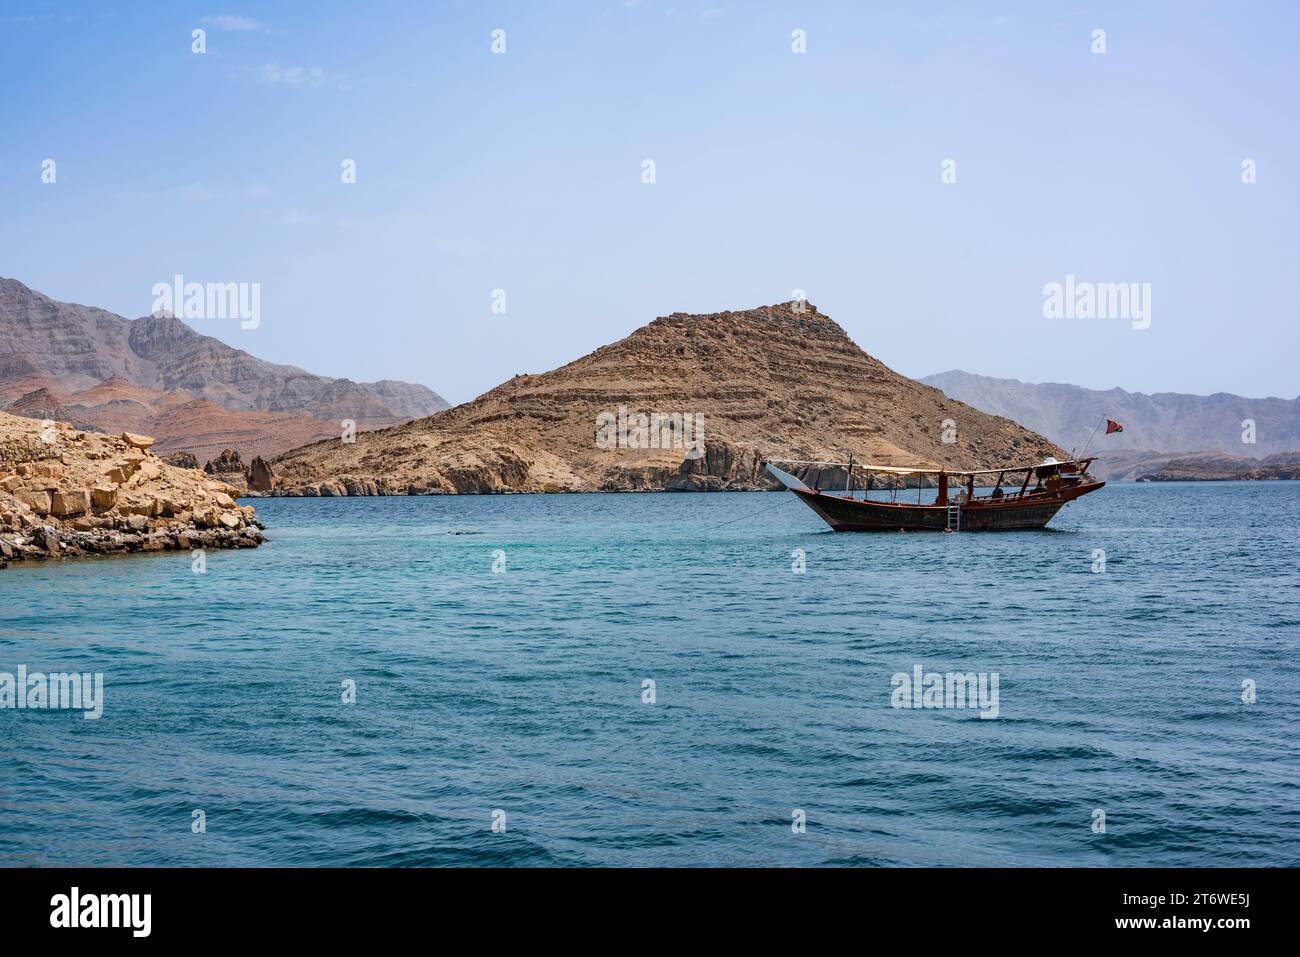 Dhow cruise in Oman's Khasab Fjords, a breathtaking landscape of the scenic Musandam Peninsula Stock Photo